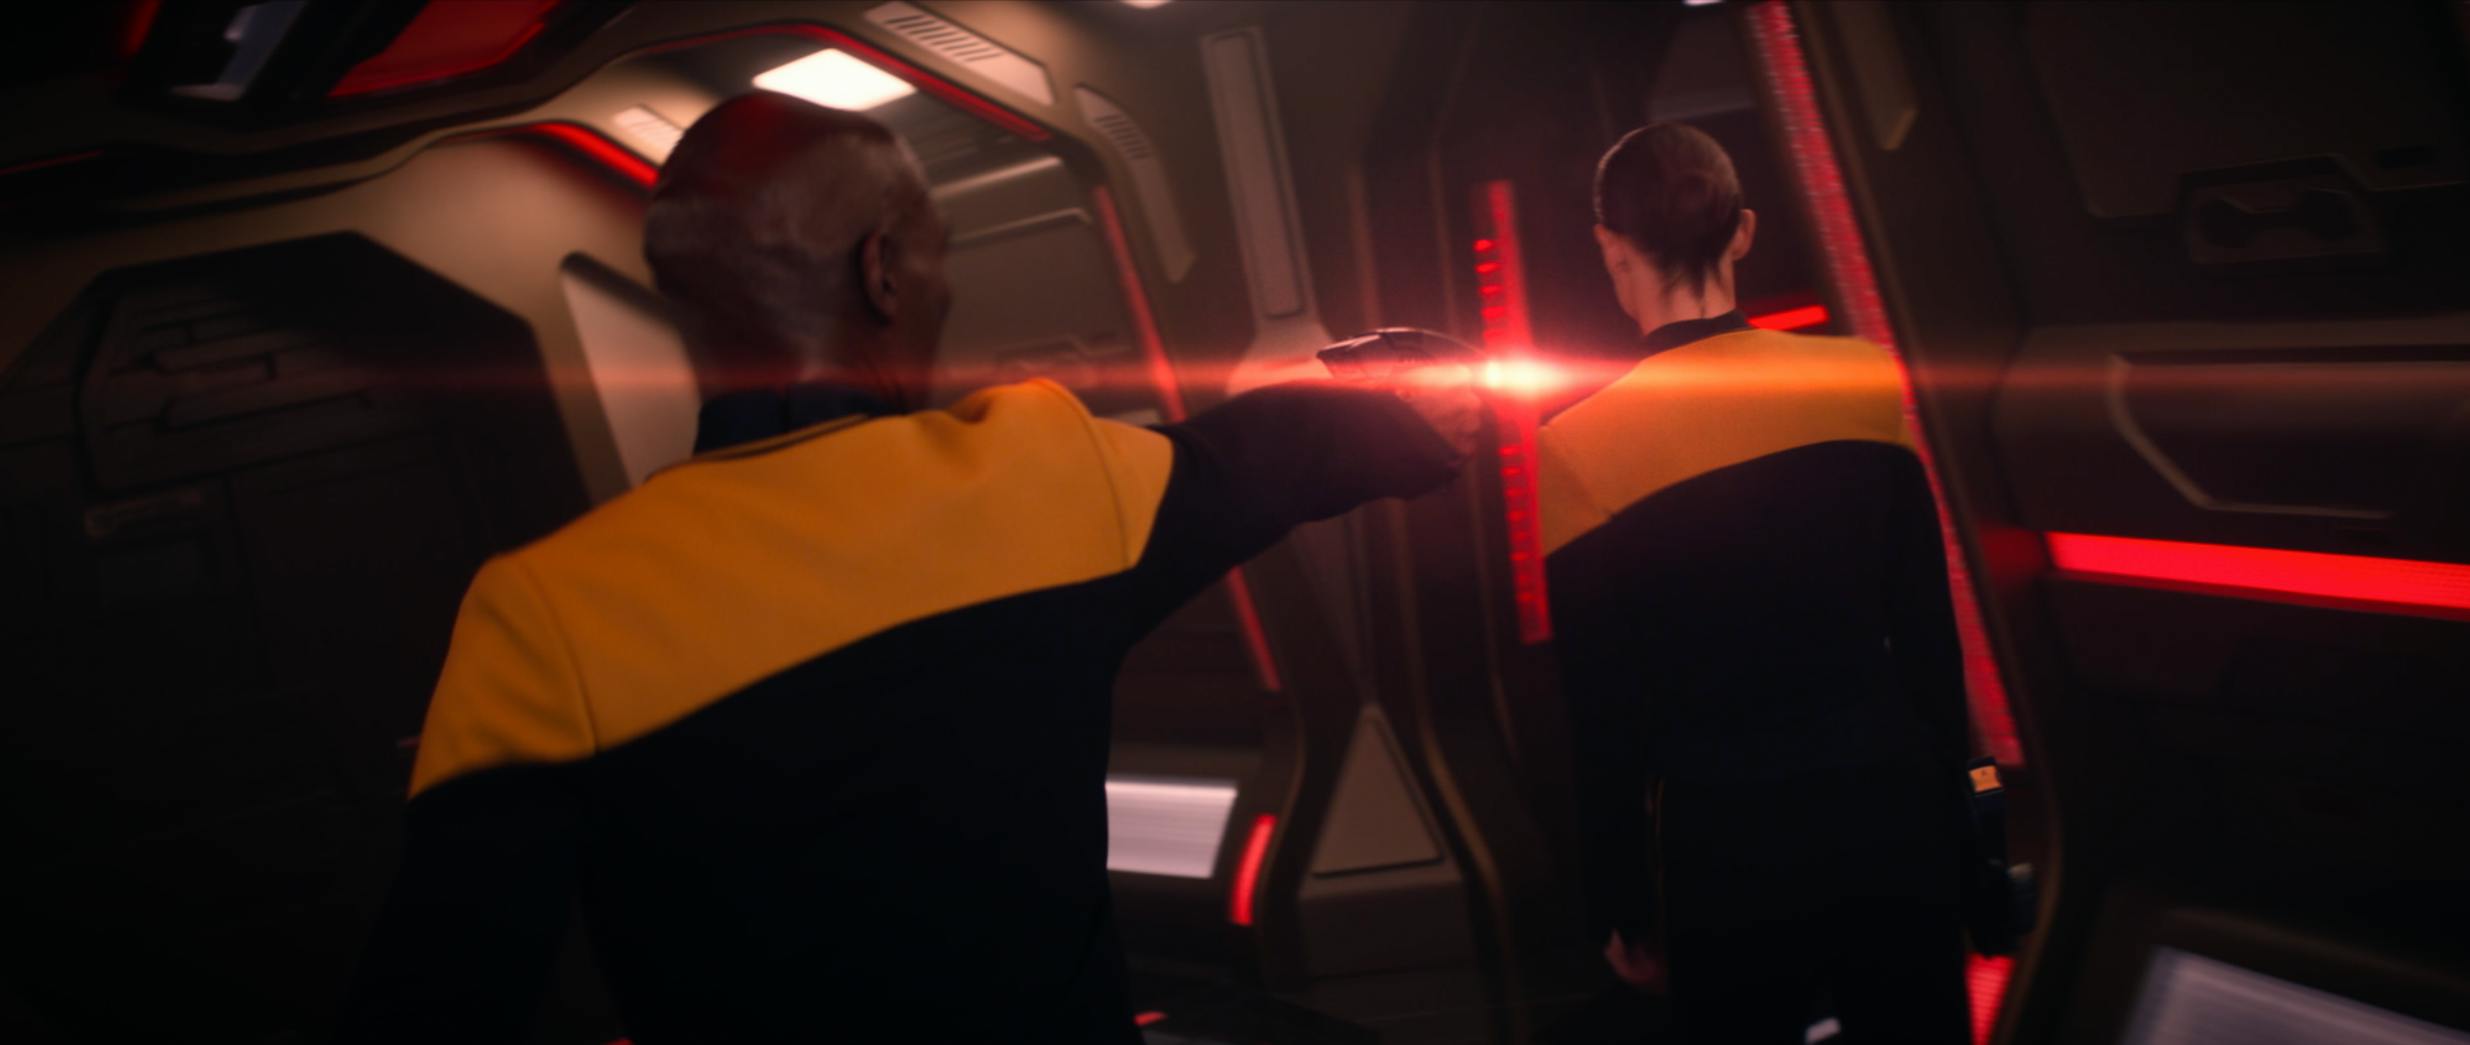 A Changeling posing as an officer shoots at a Titan officer on Star Trek: Picard